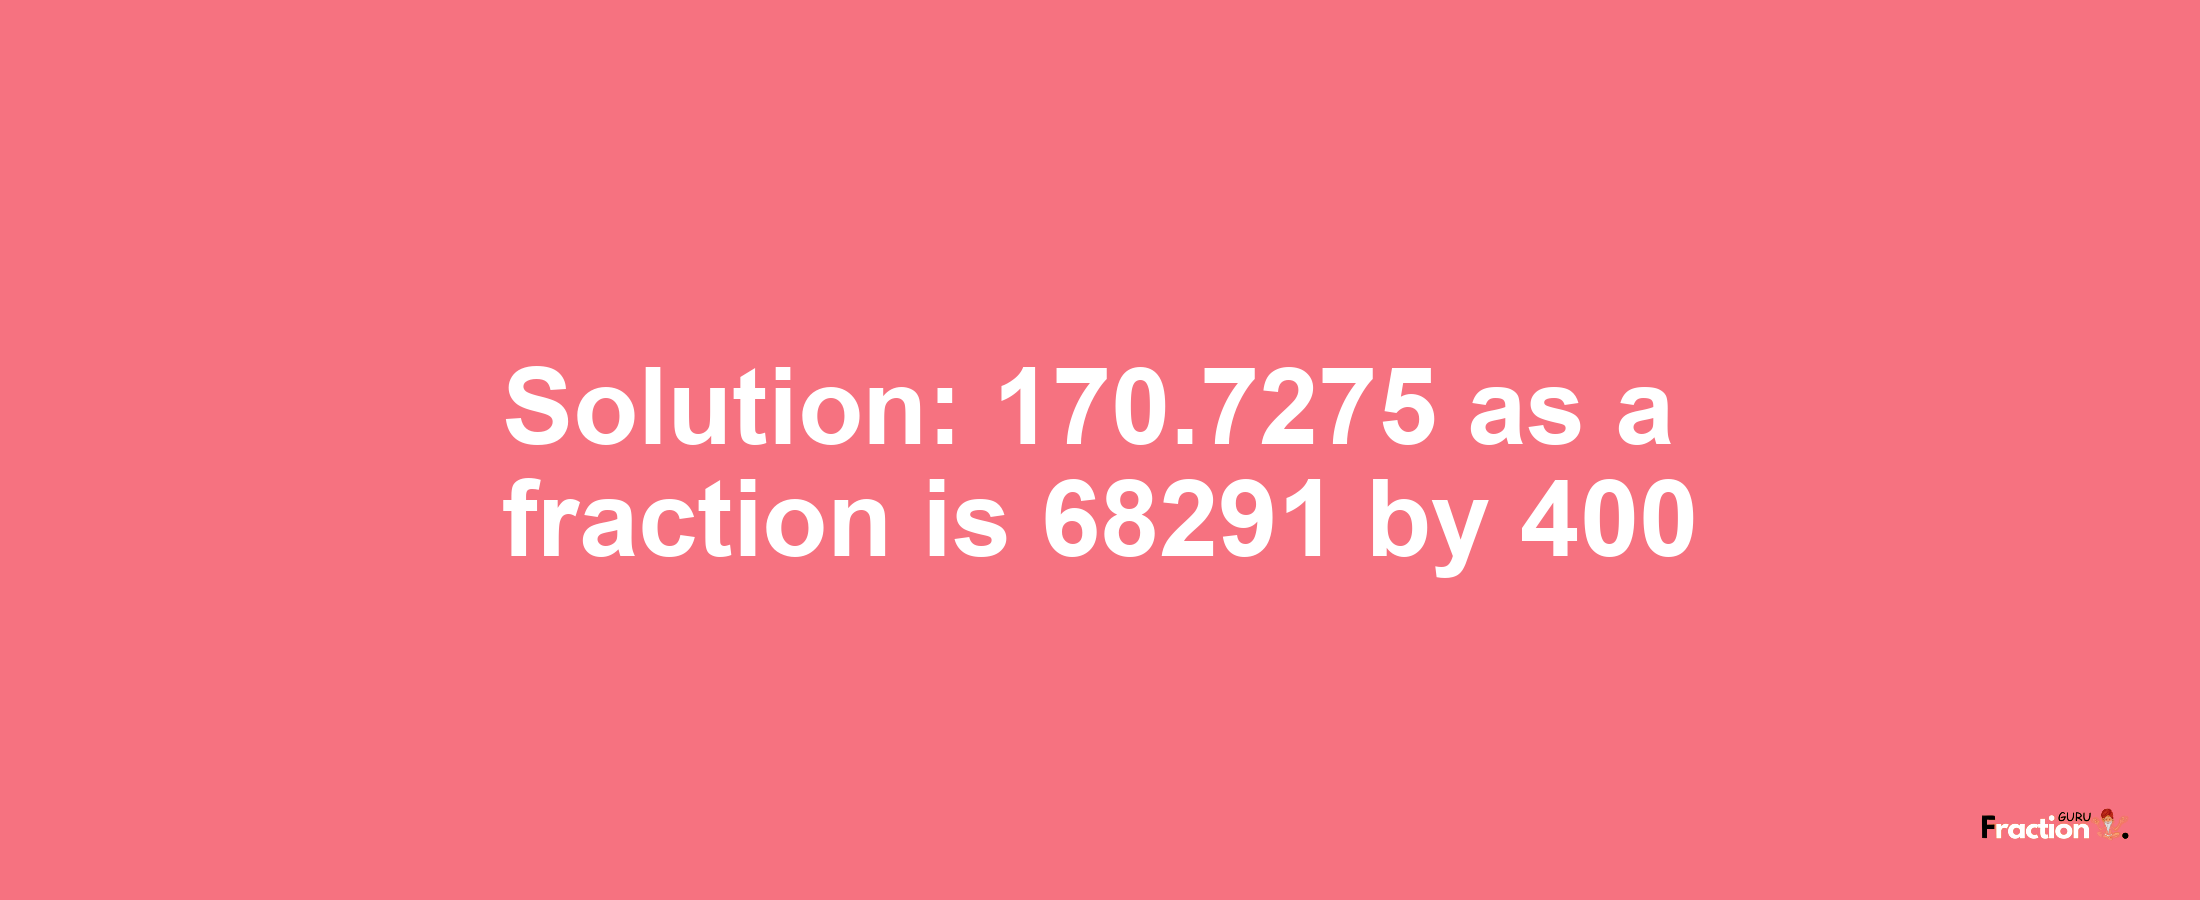 Solution:170.7275 as a fraction is 68291/400